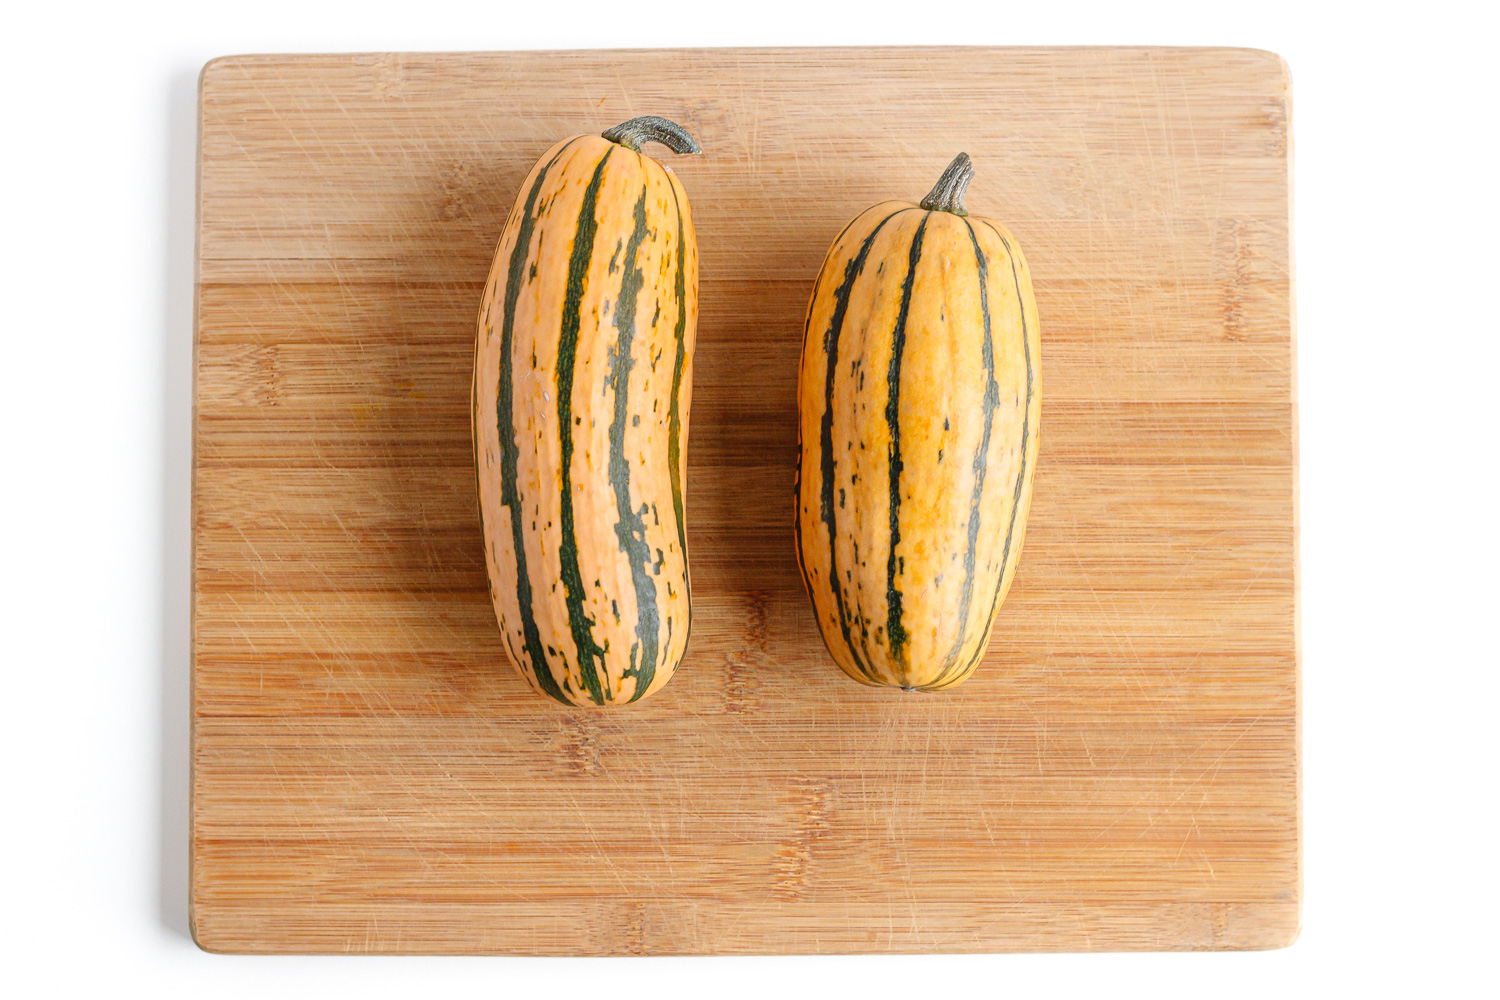 Two delicate squash sitting on a wooden cutting board.